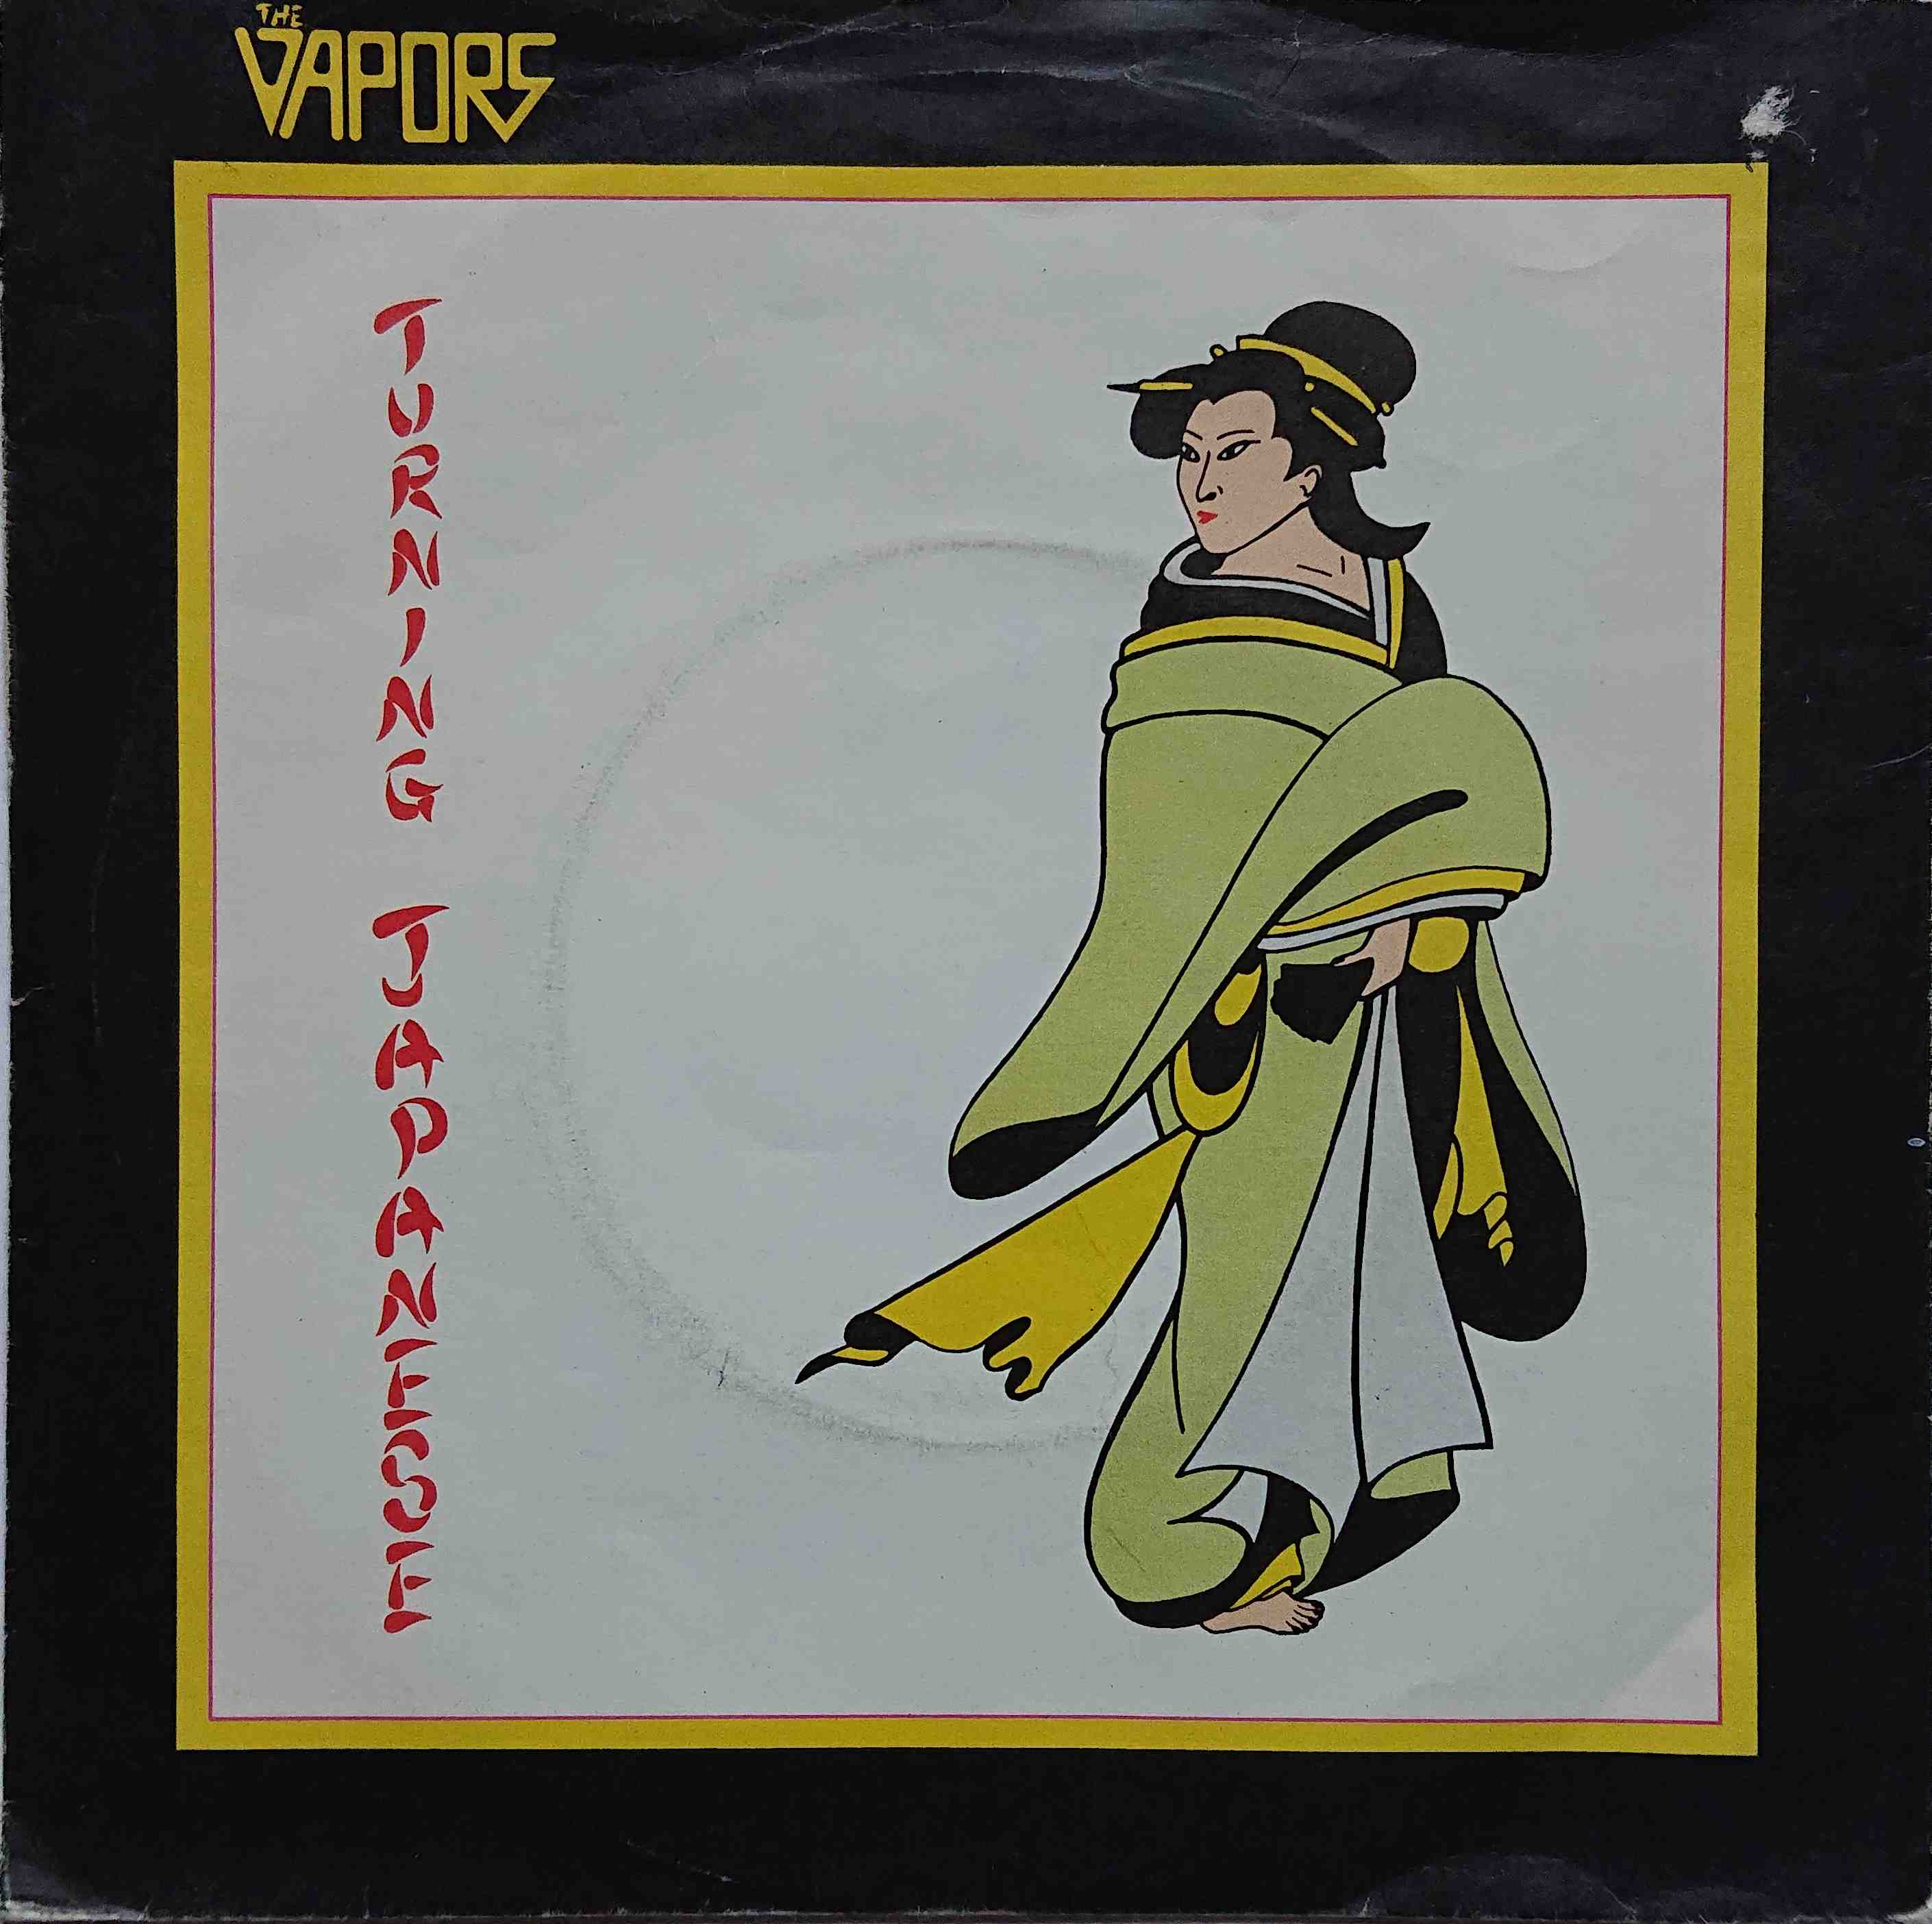 Picture of Turning Japanese by artist The Vapors 